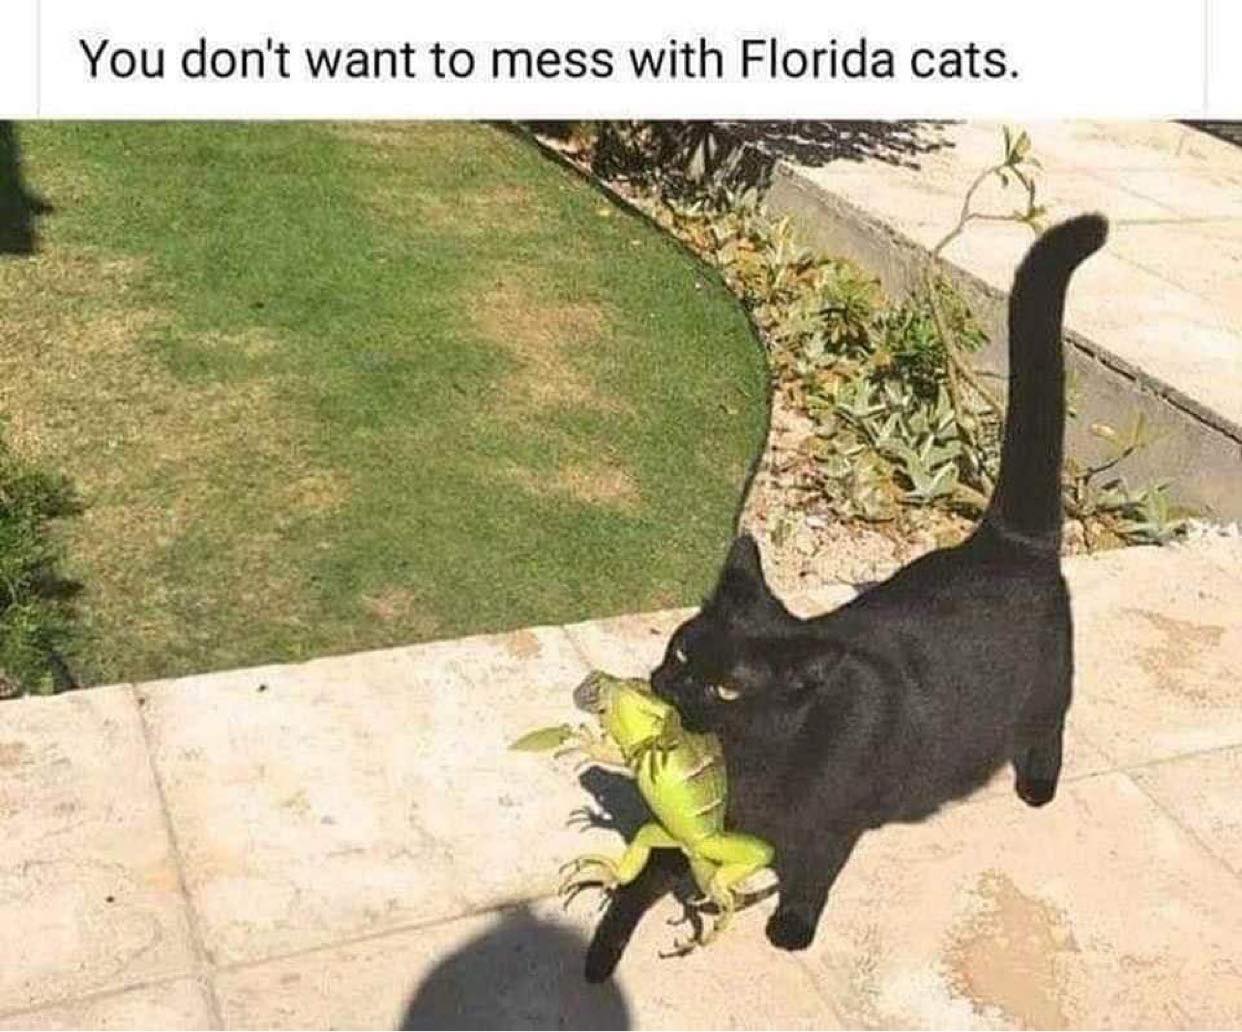 cats and lizards - You don't want to mess with Florida cats. .